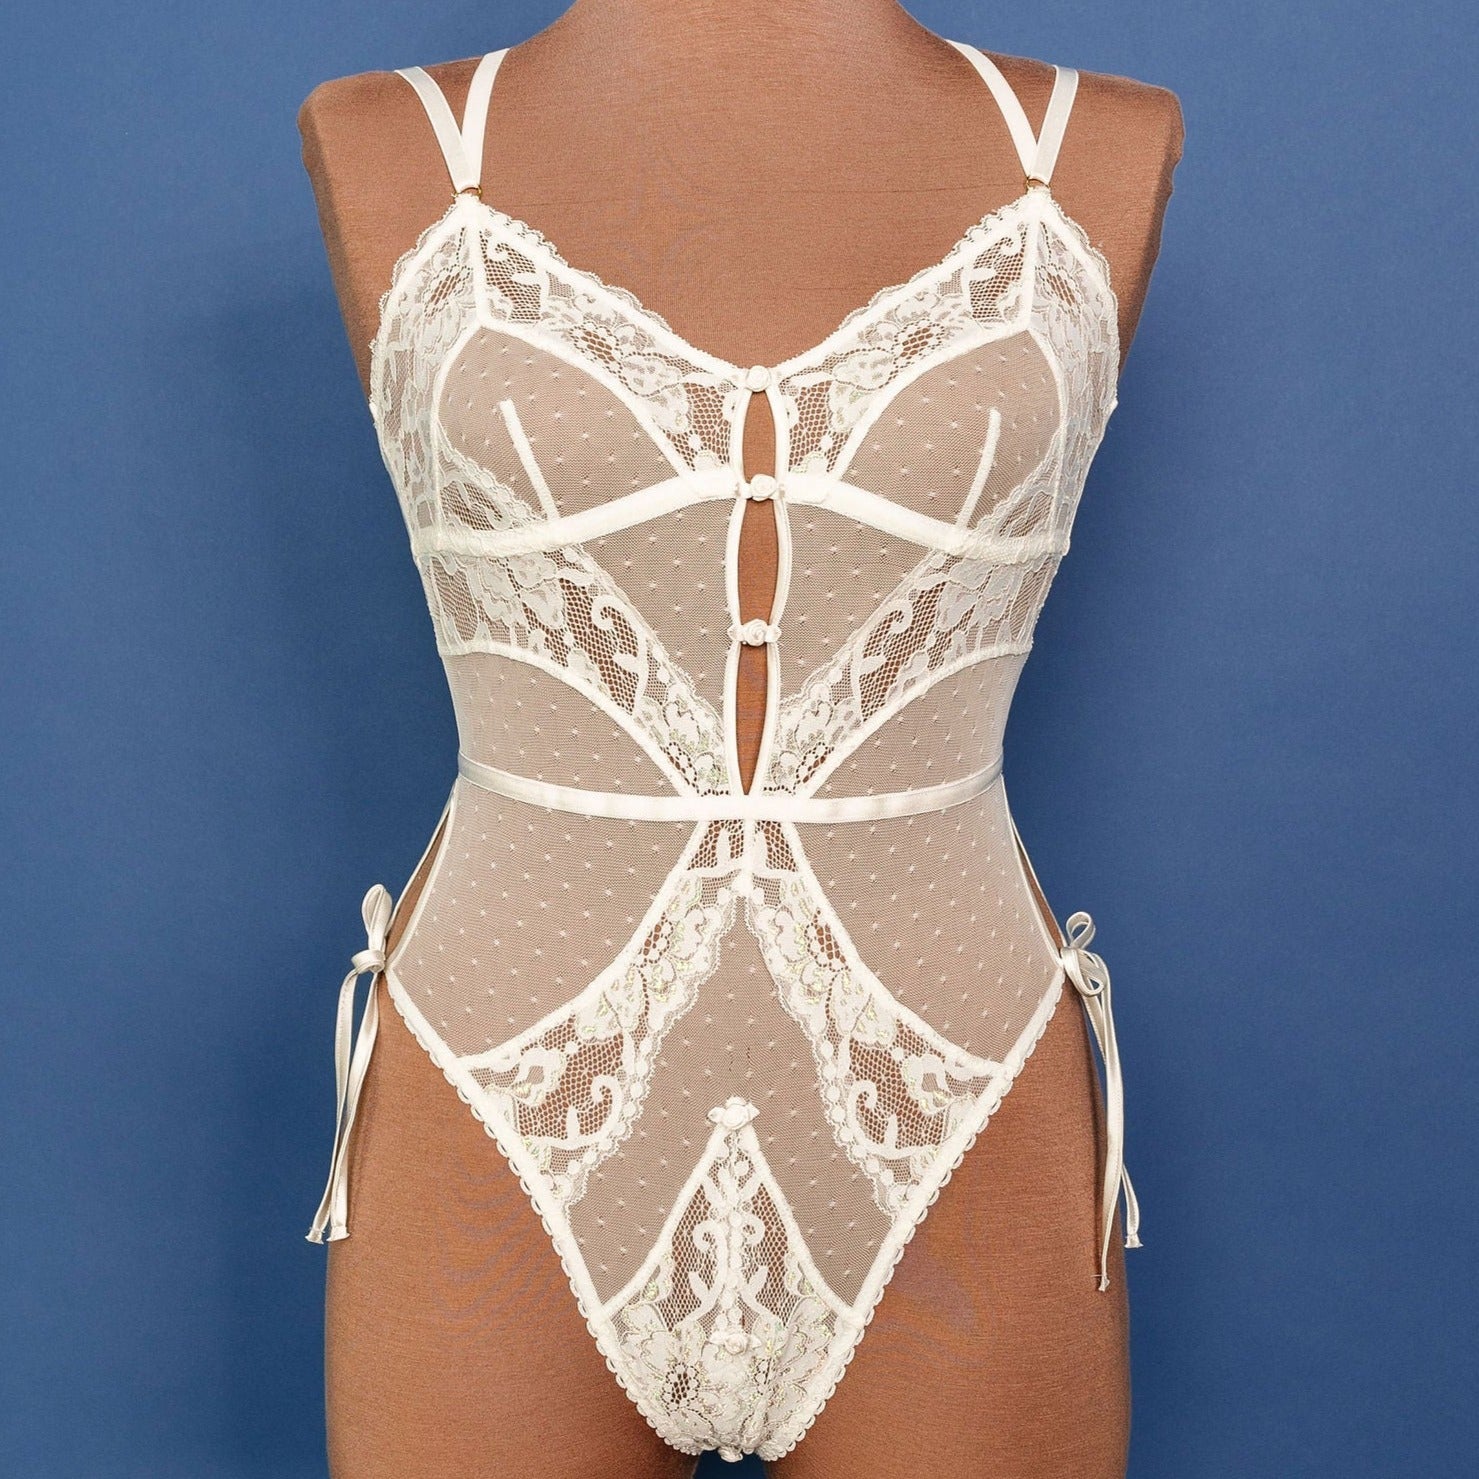 Lacy Rosette Crotchless Teddy - Iridescent Cream